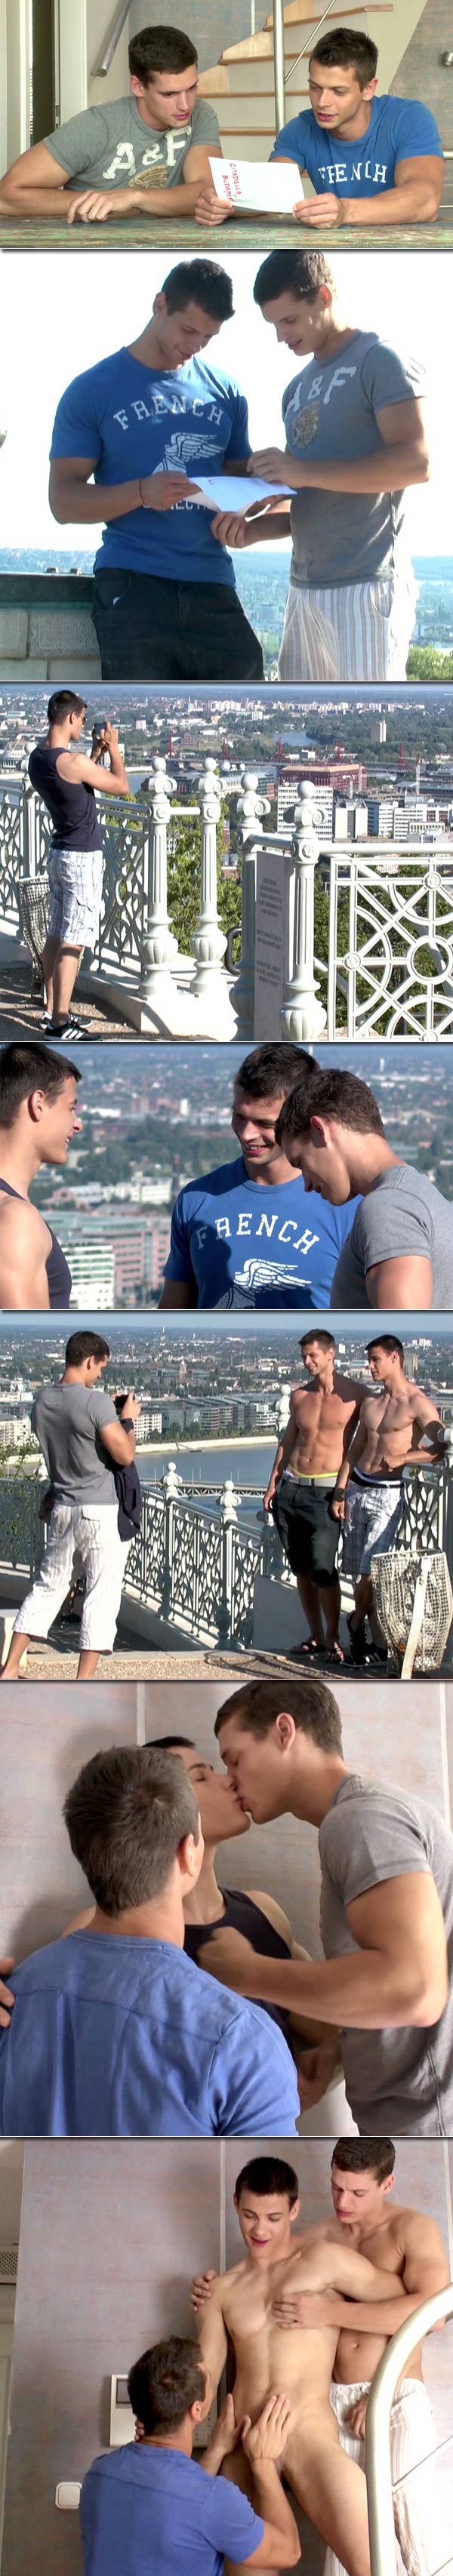 Fantasy 3-Way (with Rhys Jagger, Jean-Daniel Chagall and Andrei Karenin) (Bareback) at BelAmiOnline at BelAmiOnline.com